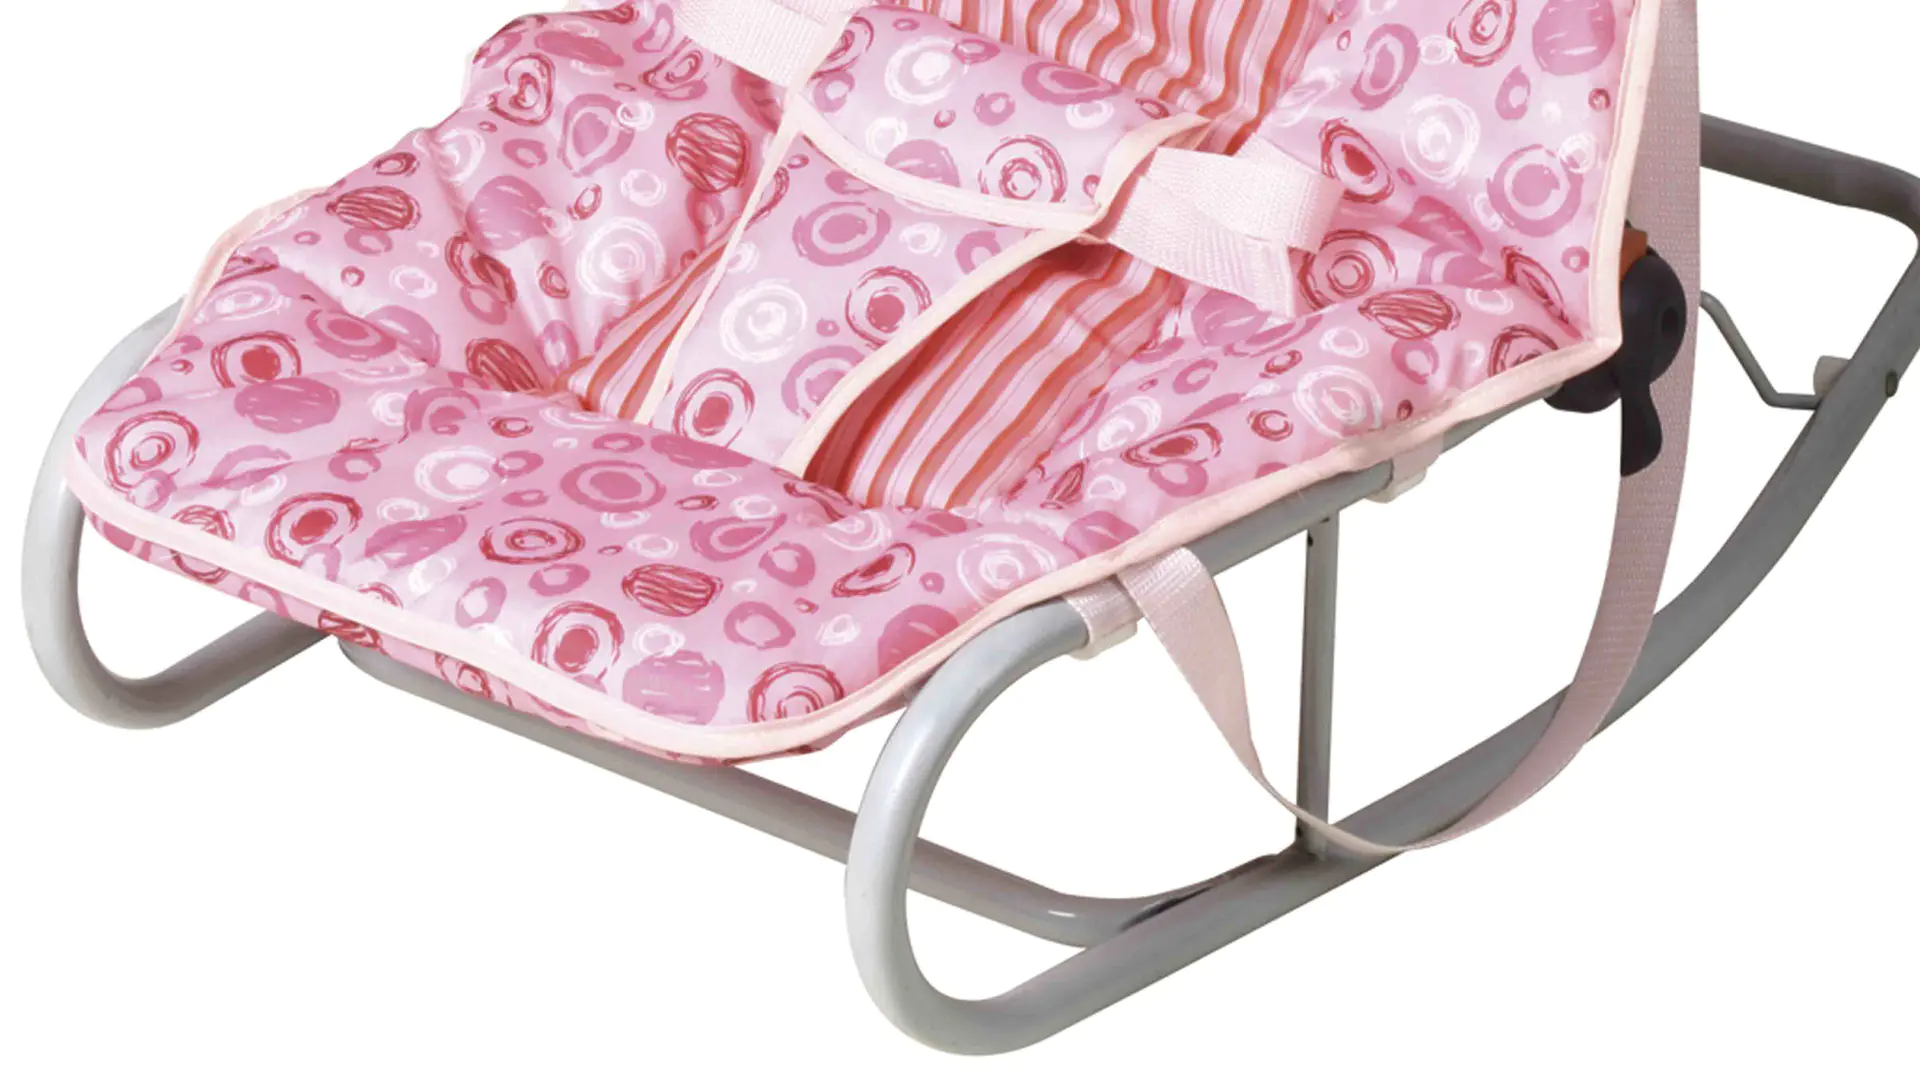 simple baby bouncer price supplier for bedroom